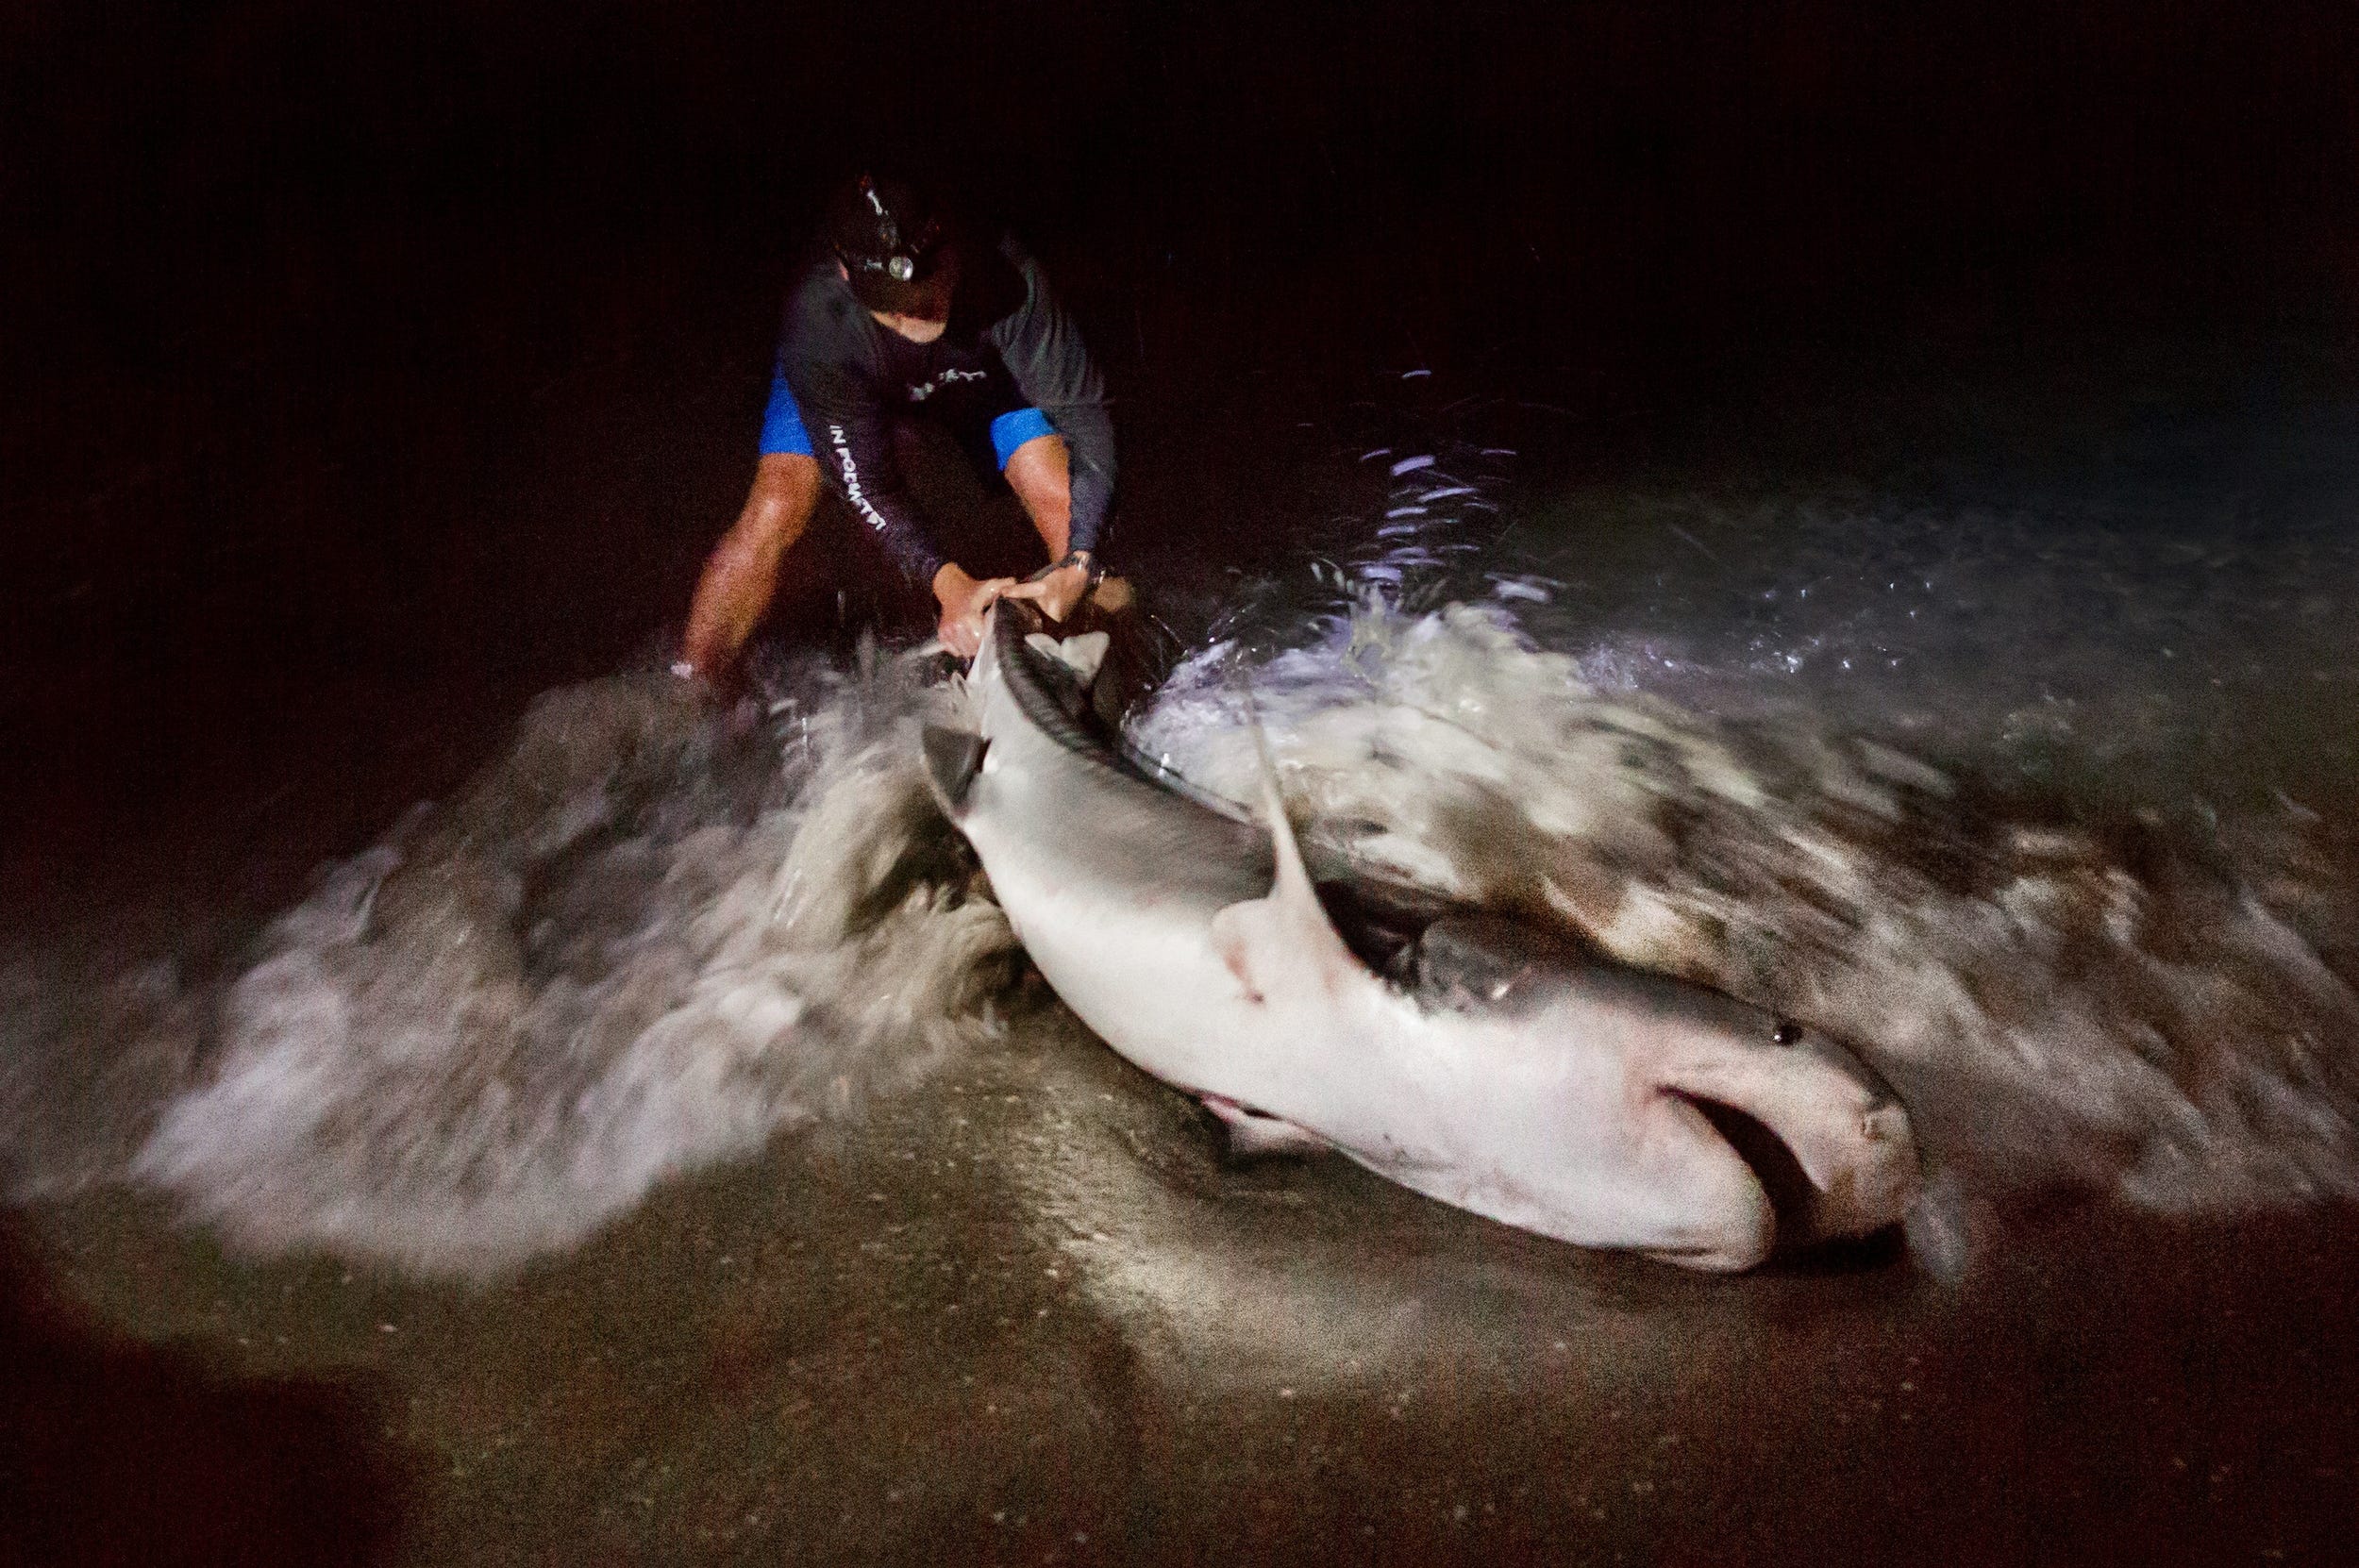 State considers first regulations for beach-based shark fishing